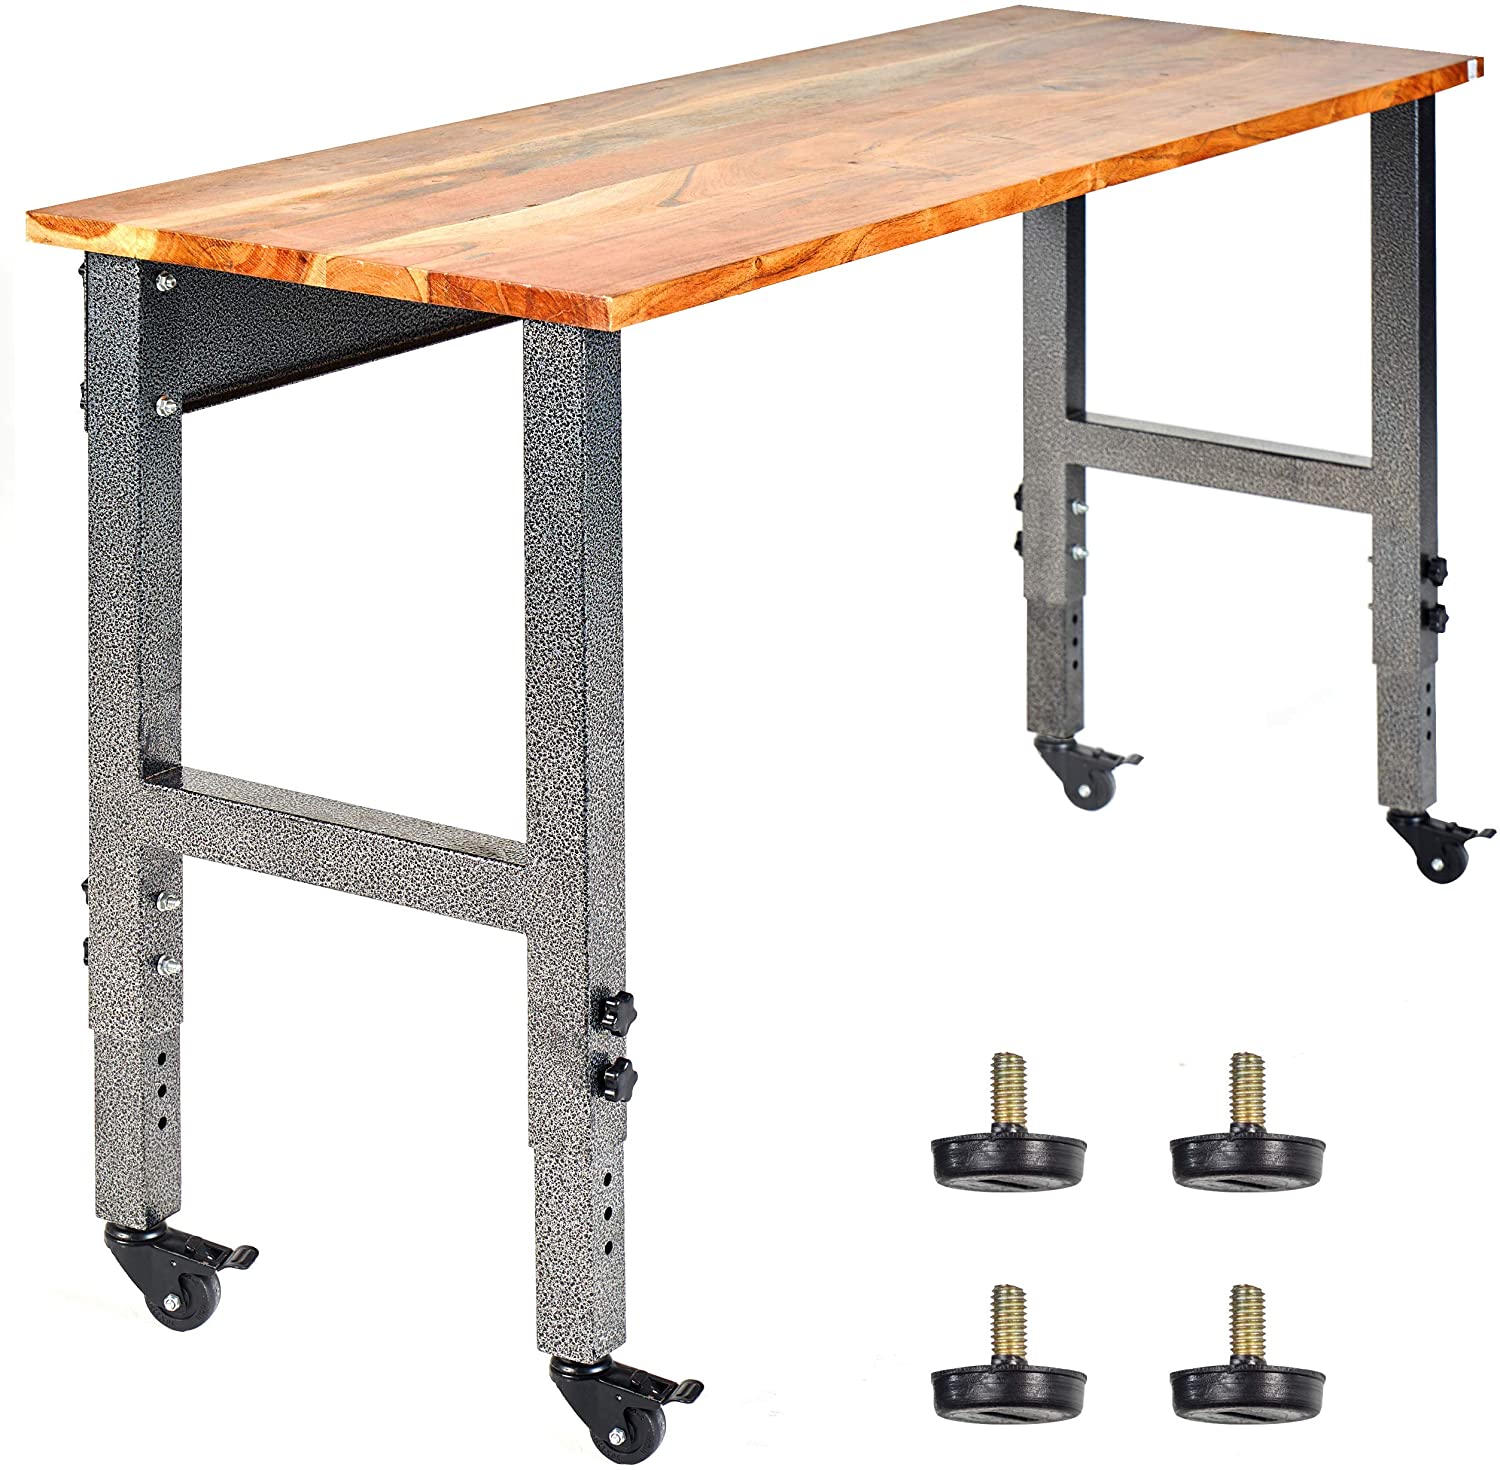 <strong>5. Mobile Garage Workbench w/Casters</strong>